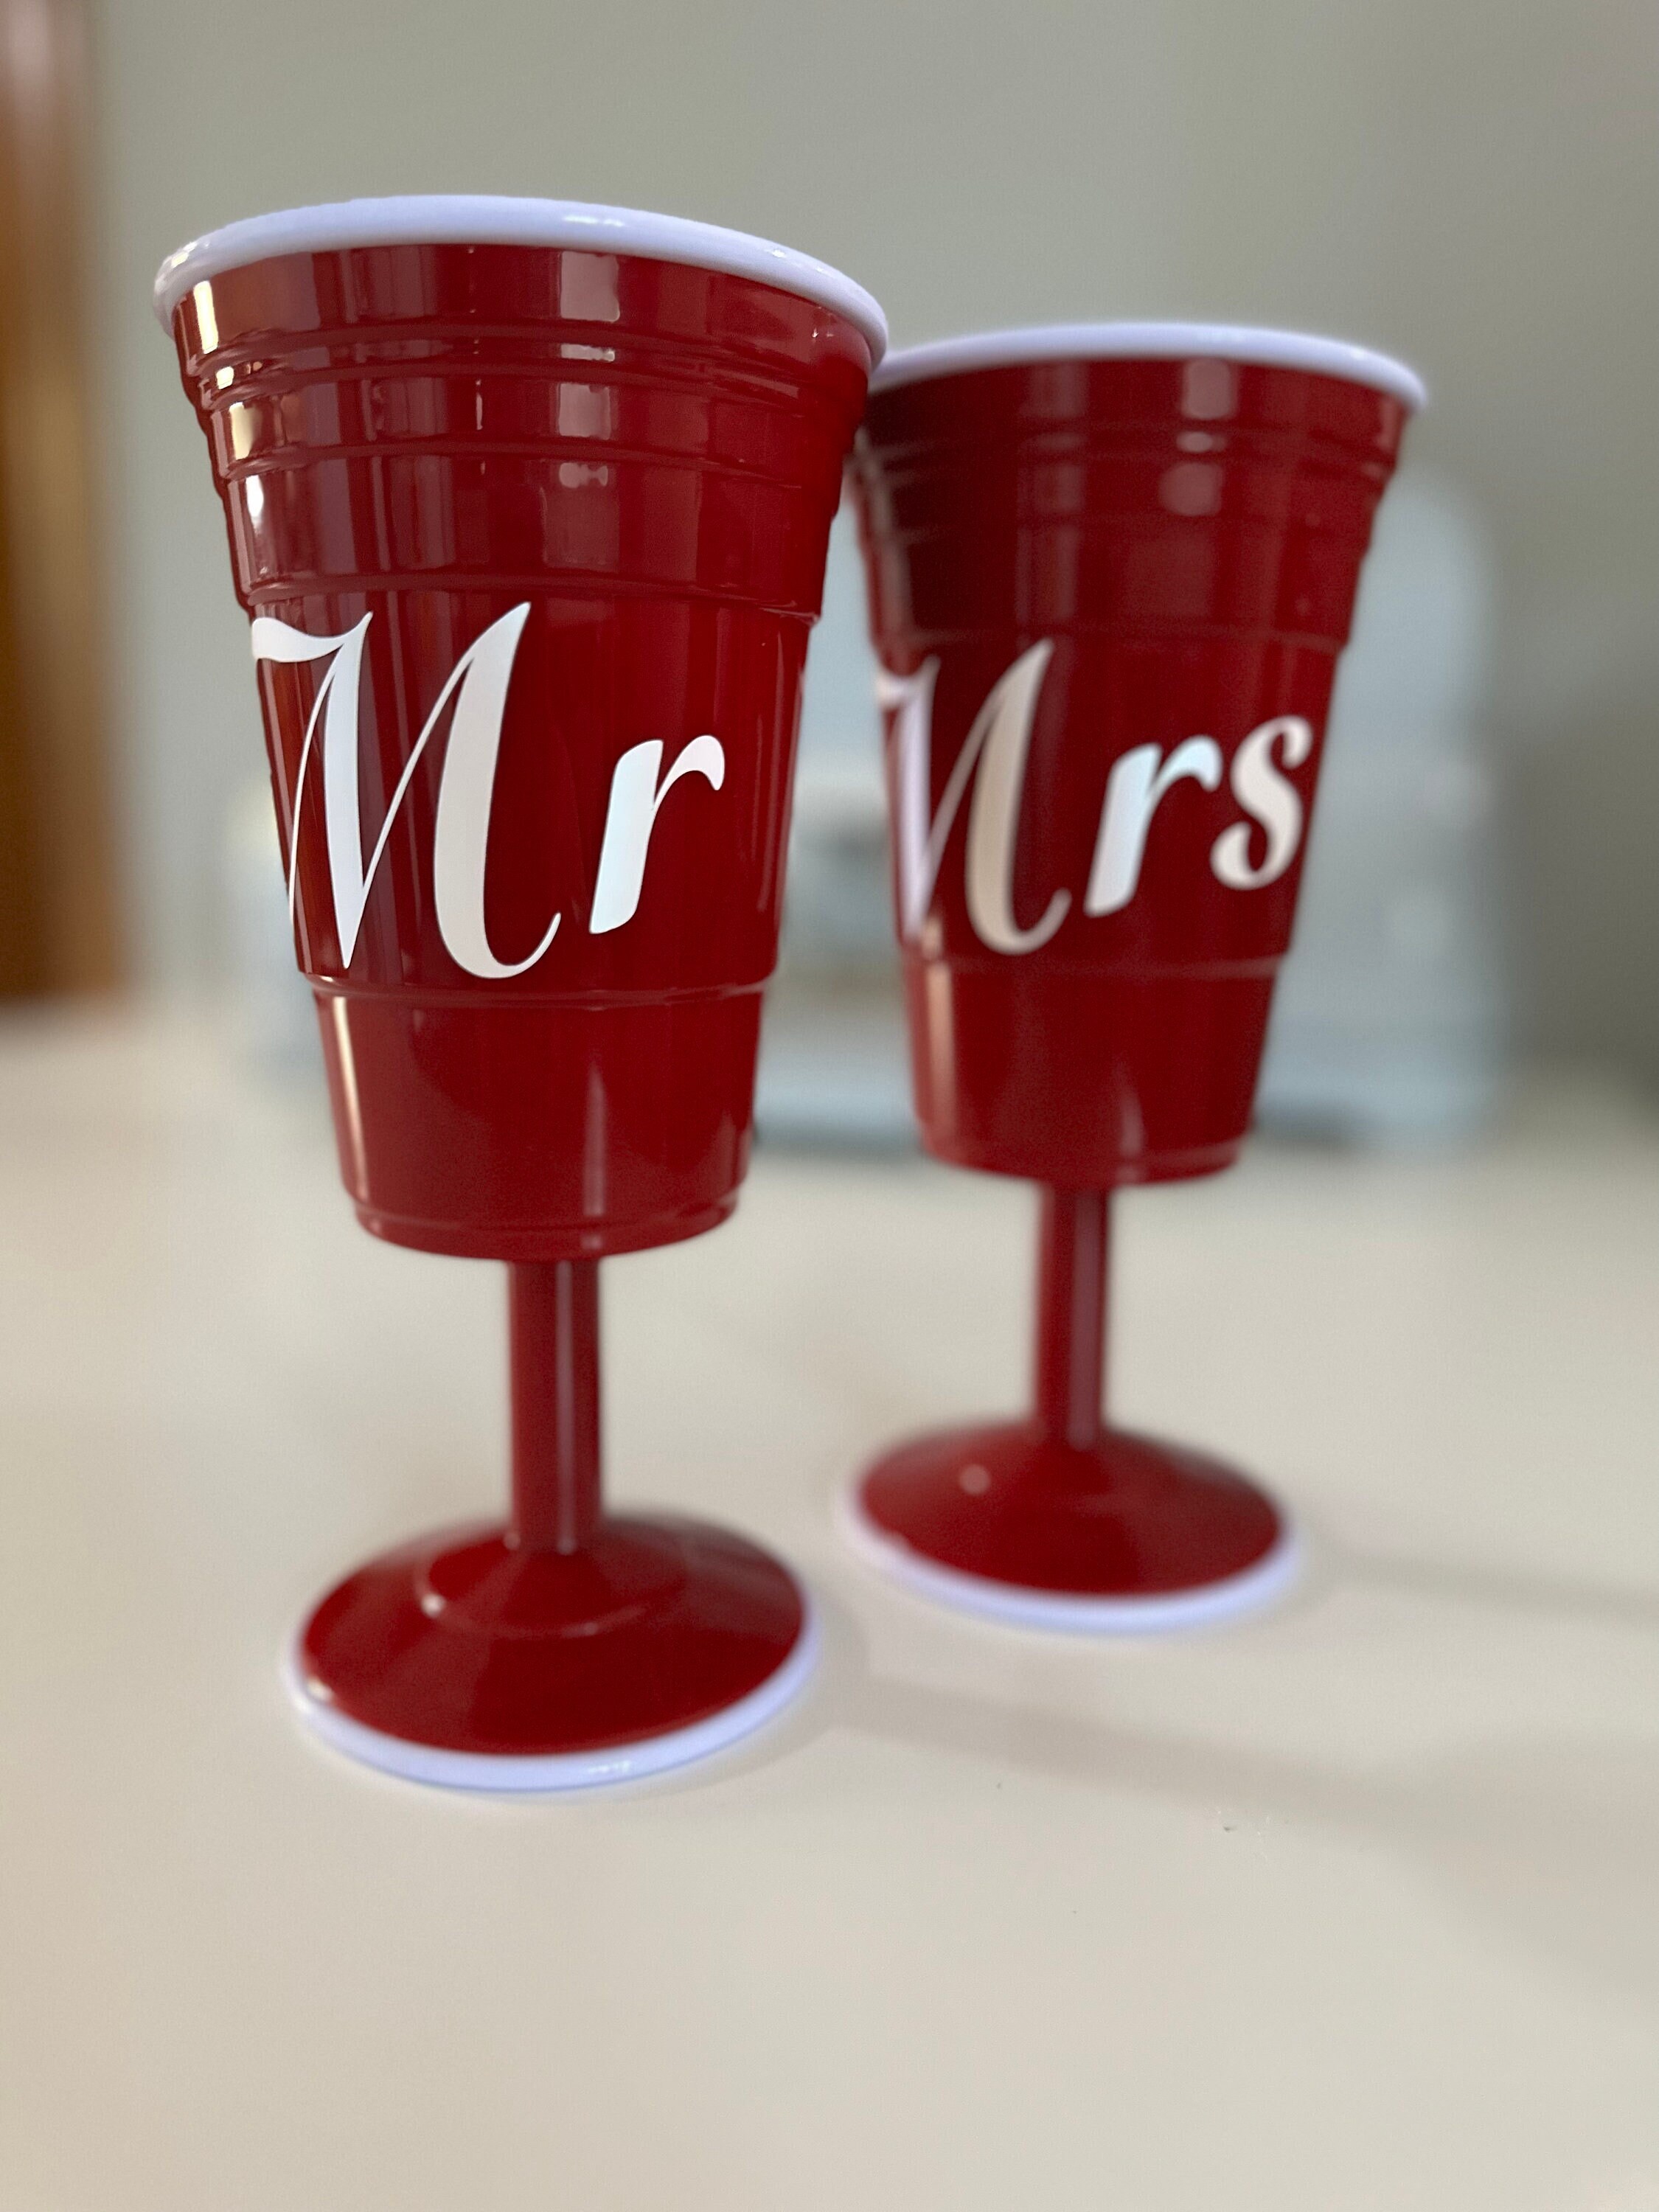 Enamel Red Solo Cup Charms